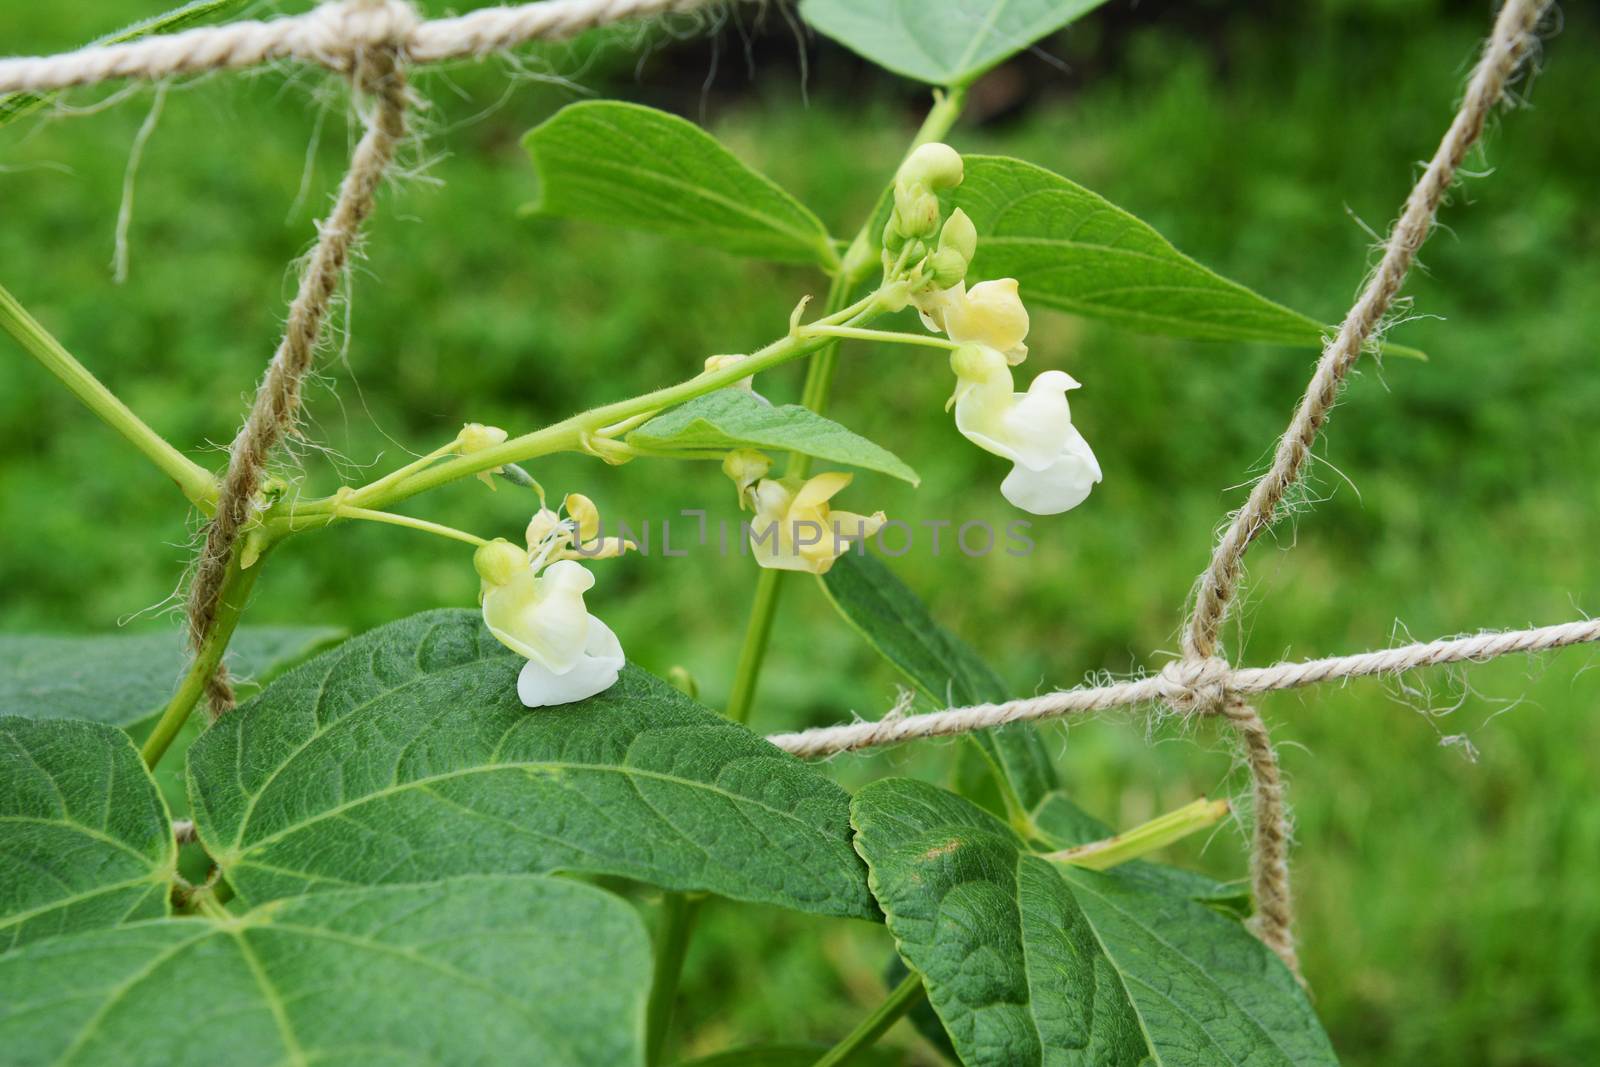 White flowers of a calypso bean plant  by sarahdoow